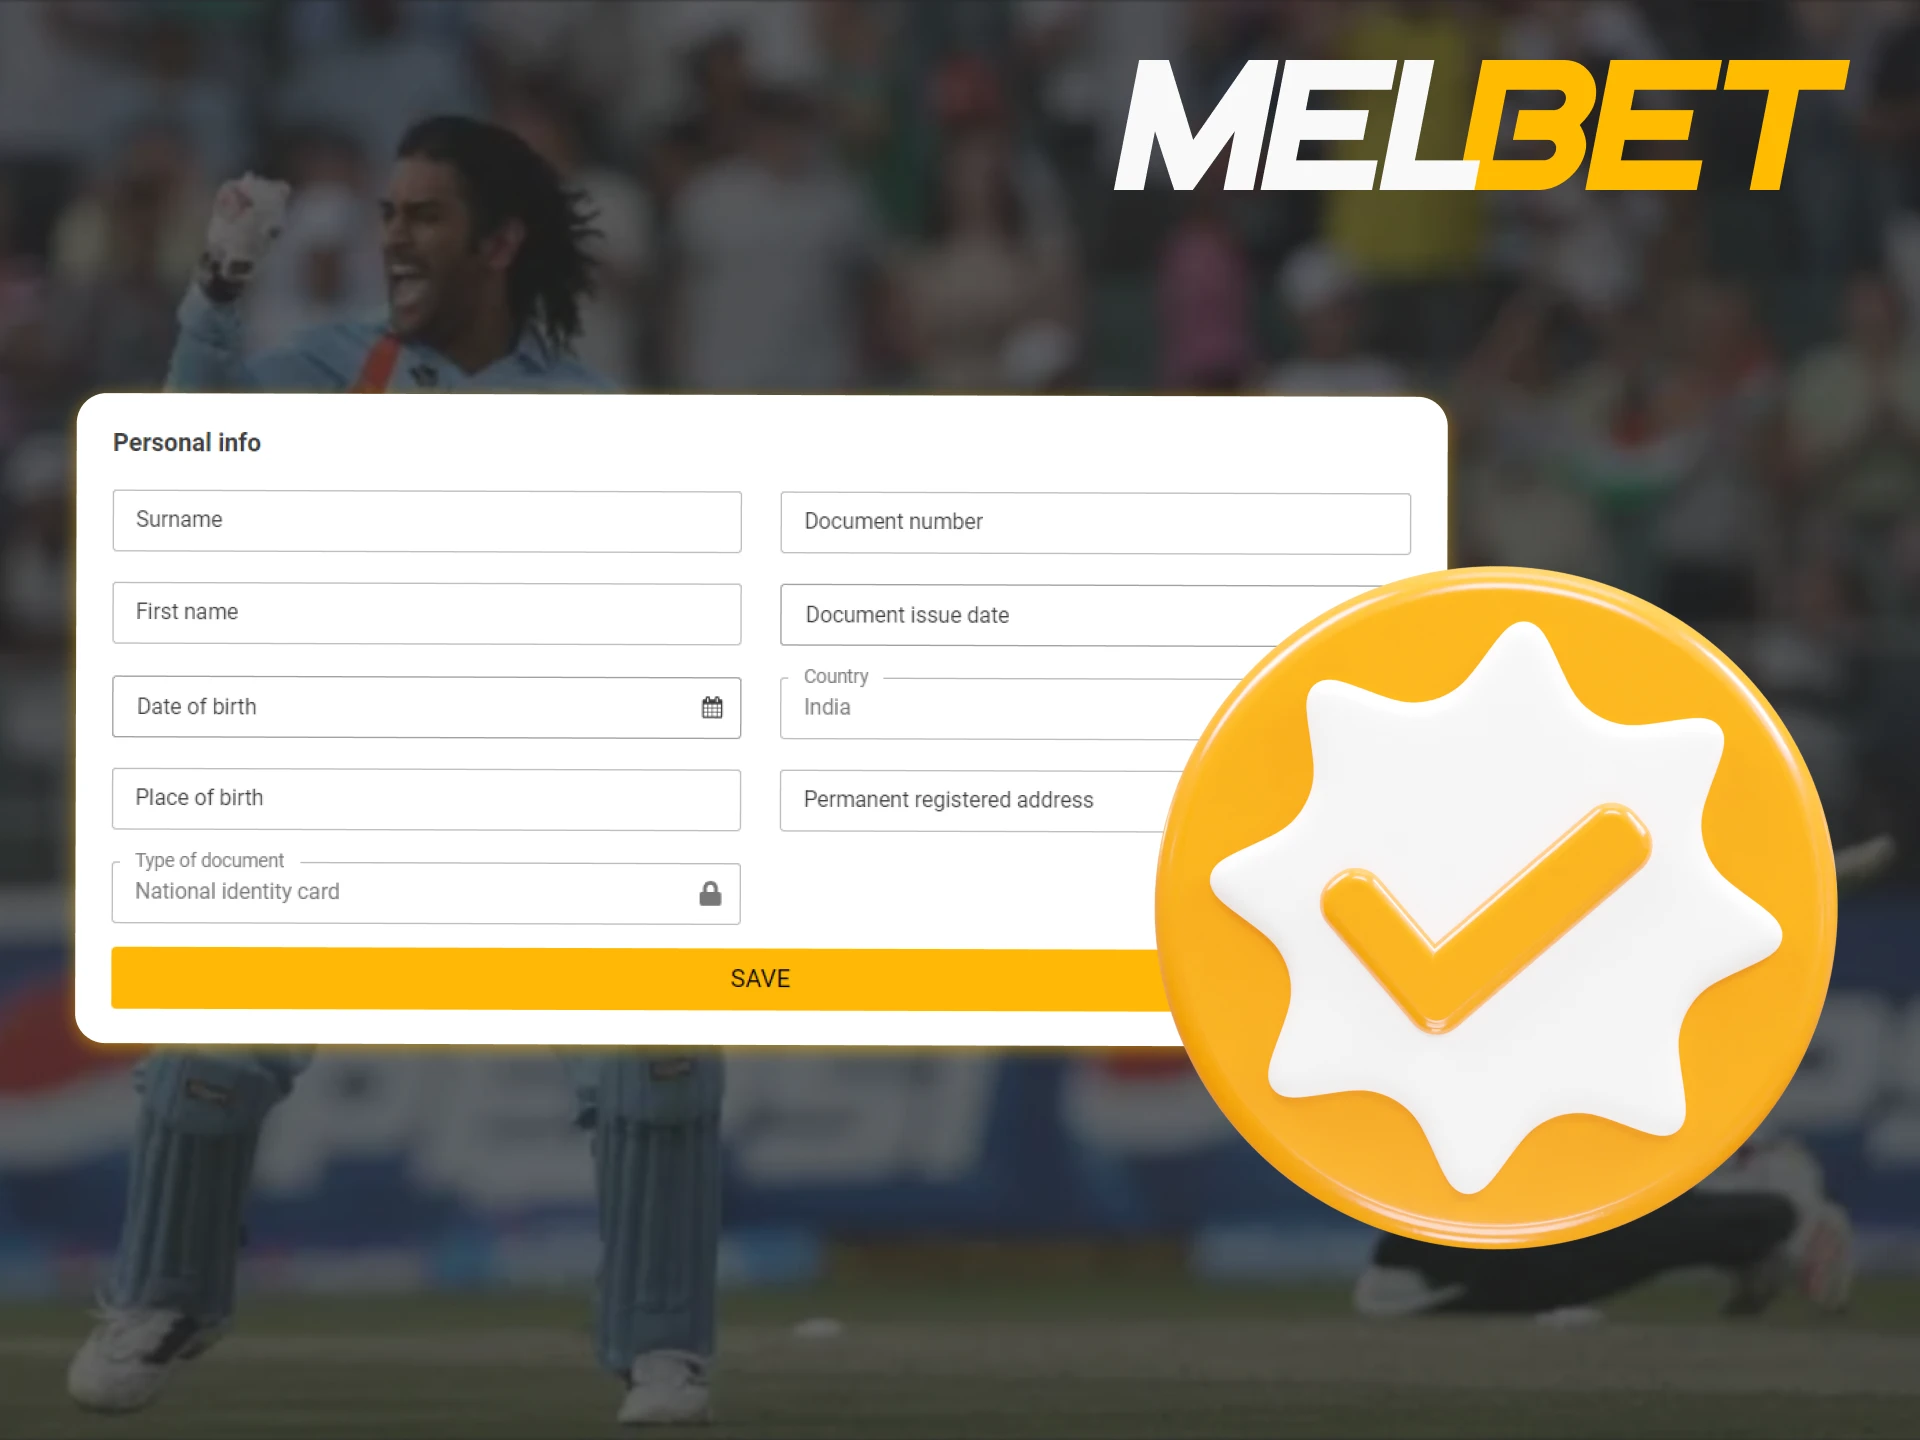 To verify your Melbet account, you need to fill out all the fields in your account settings.